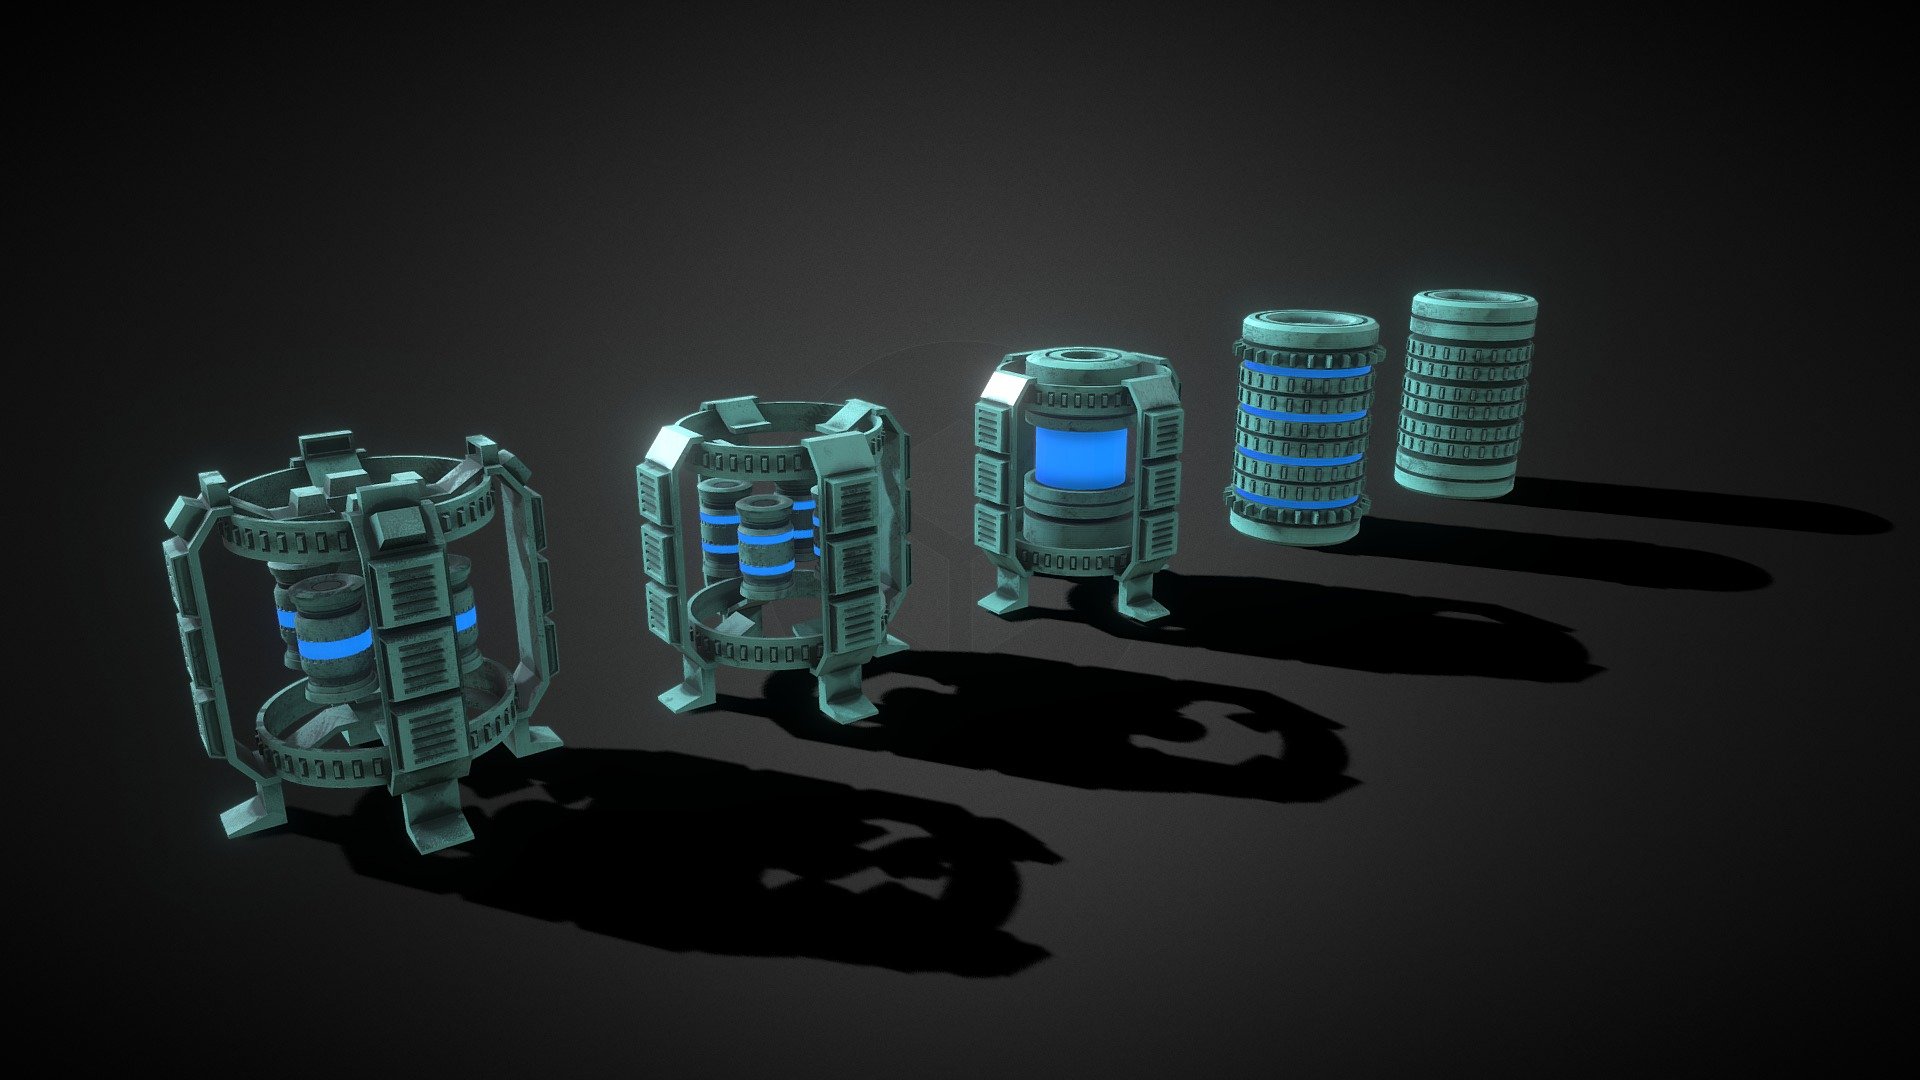 Sci- Fi Cylinder Version One (Part Four) is a Sci-Fi PBR asset. This is a continuation process of my PBR game ready asset creation workflow. This asset is fit for any modern and sci-fi games. The features are given below:




PBR asset (Metallic Roughness)

It includes 7 Maps (Base Color, AO, Normal, Height, Metallic, Roughness finally Emissive)

Game ready asset

Ready for unity and unreal projects instantly

All 4K Textures and Maps

Good to use as props

Simple topology

Low poly

Fit for any modern game

High quality texture maps

I hope you all will like it and purchase it for your projects. Your every purchase gives me new motivation for asset creation :) Have a nice day everyone. Please follow me for getting continuous update on new assets like this. :) - Sci- Fi Cylinder Version One (Part Four) - Buy Royalty Free 3D model by Md Waziullah Apu (@ApuArt) 3d model